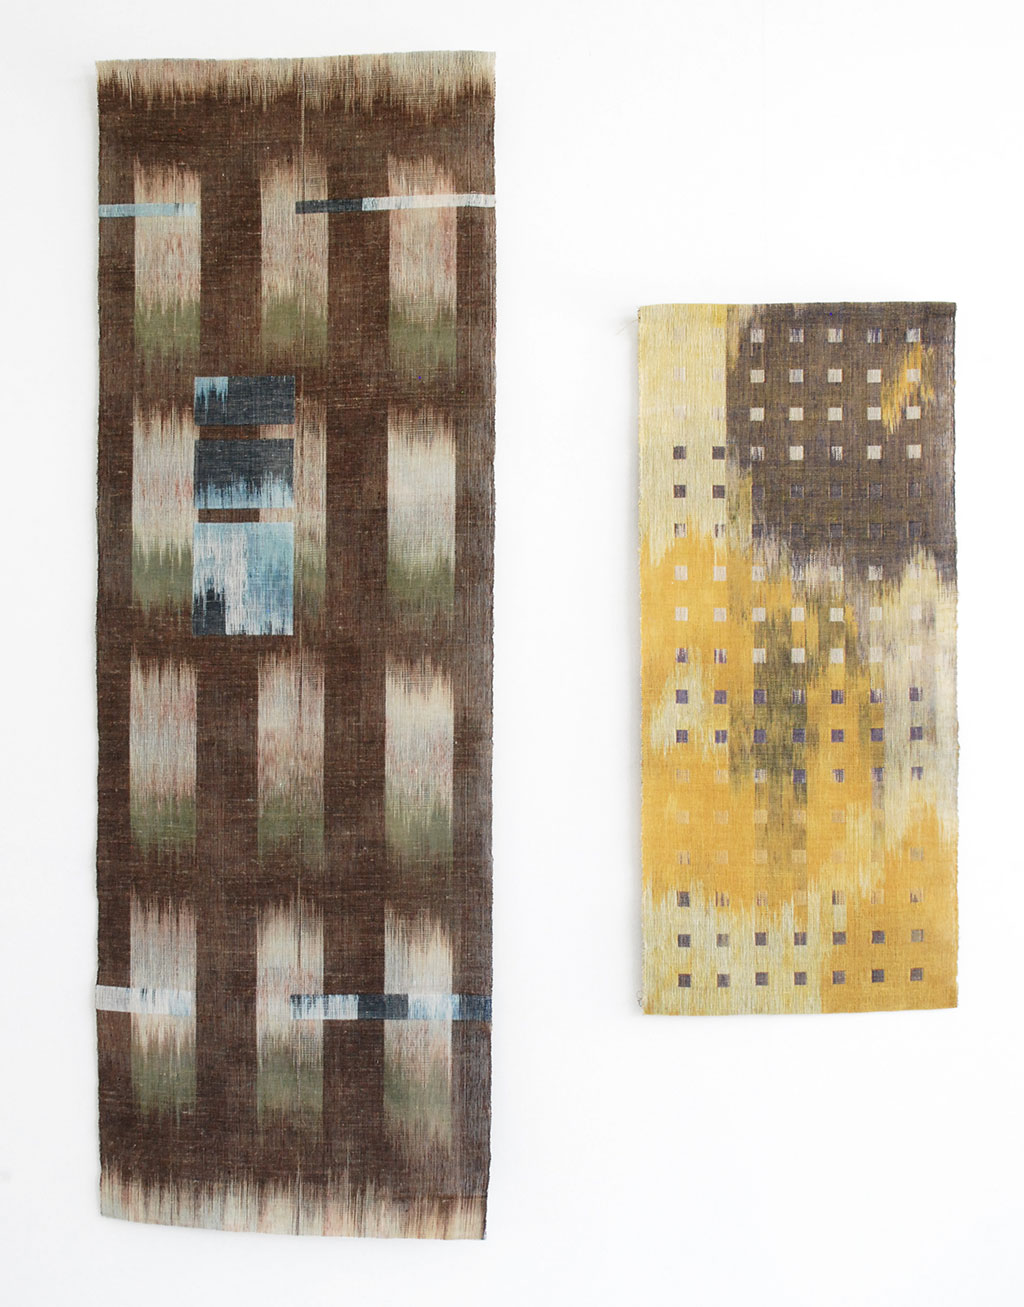 Marcia Weiss. Material Meaning: A Living Legacy of Anni Albers, Craft in America